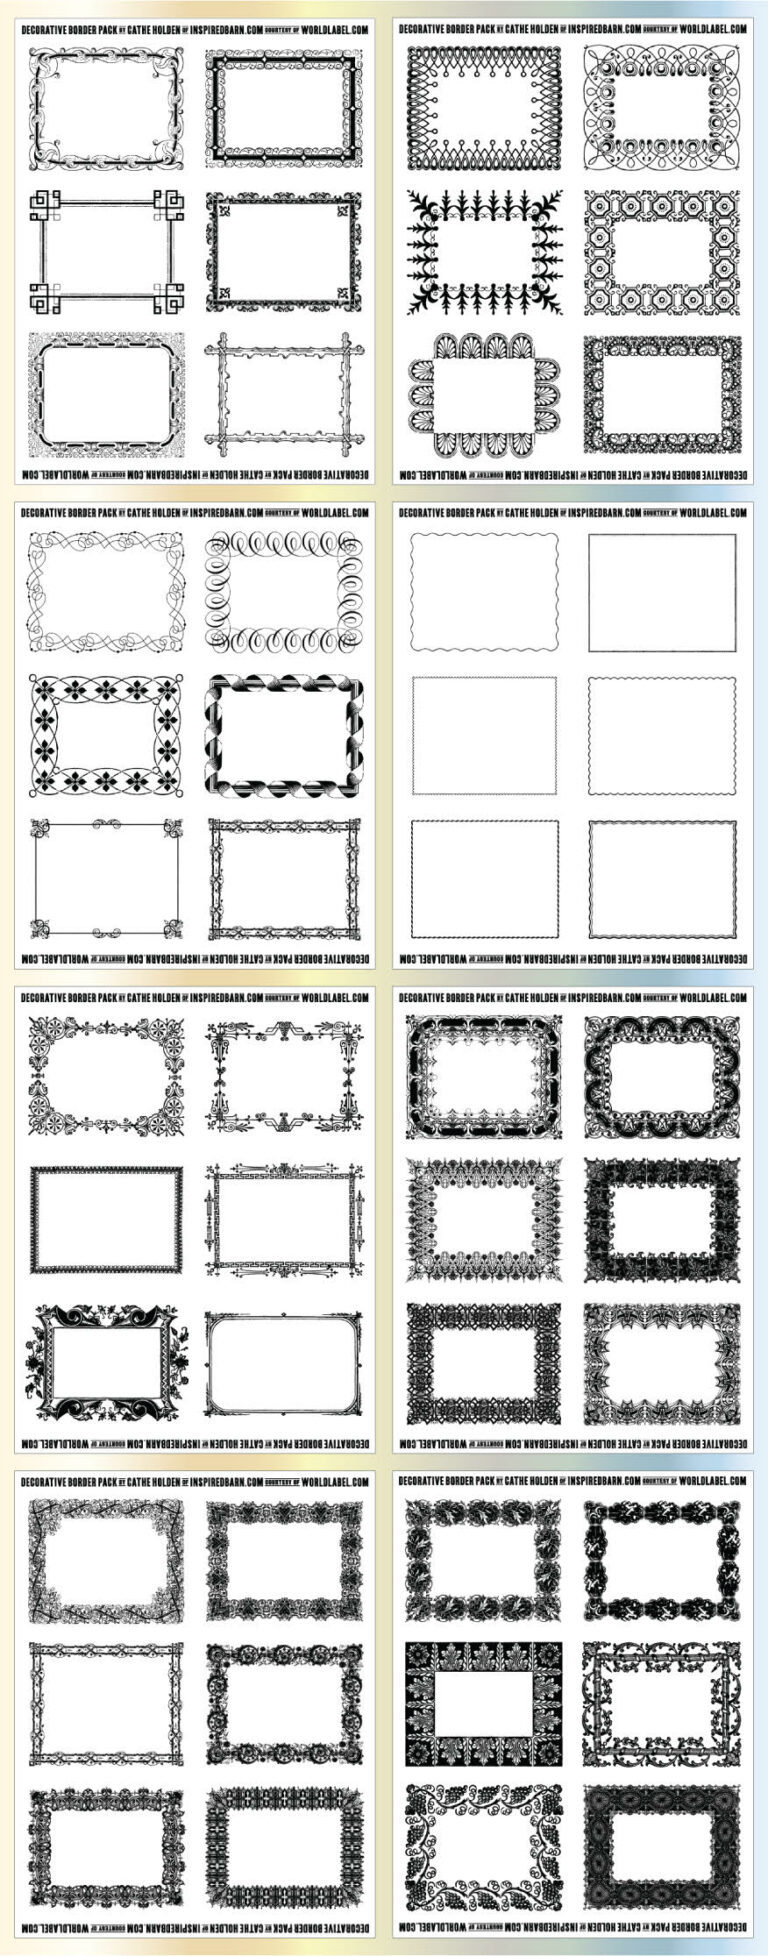 Printable Labels Template: The Ultimate Guide to Customize and Create Professional Labels